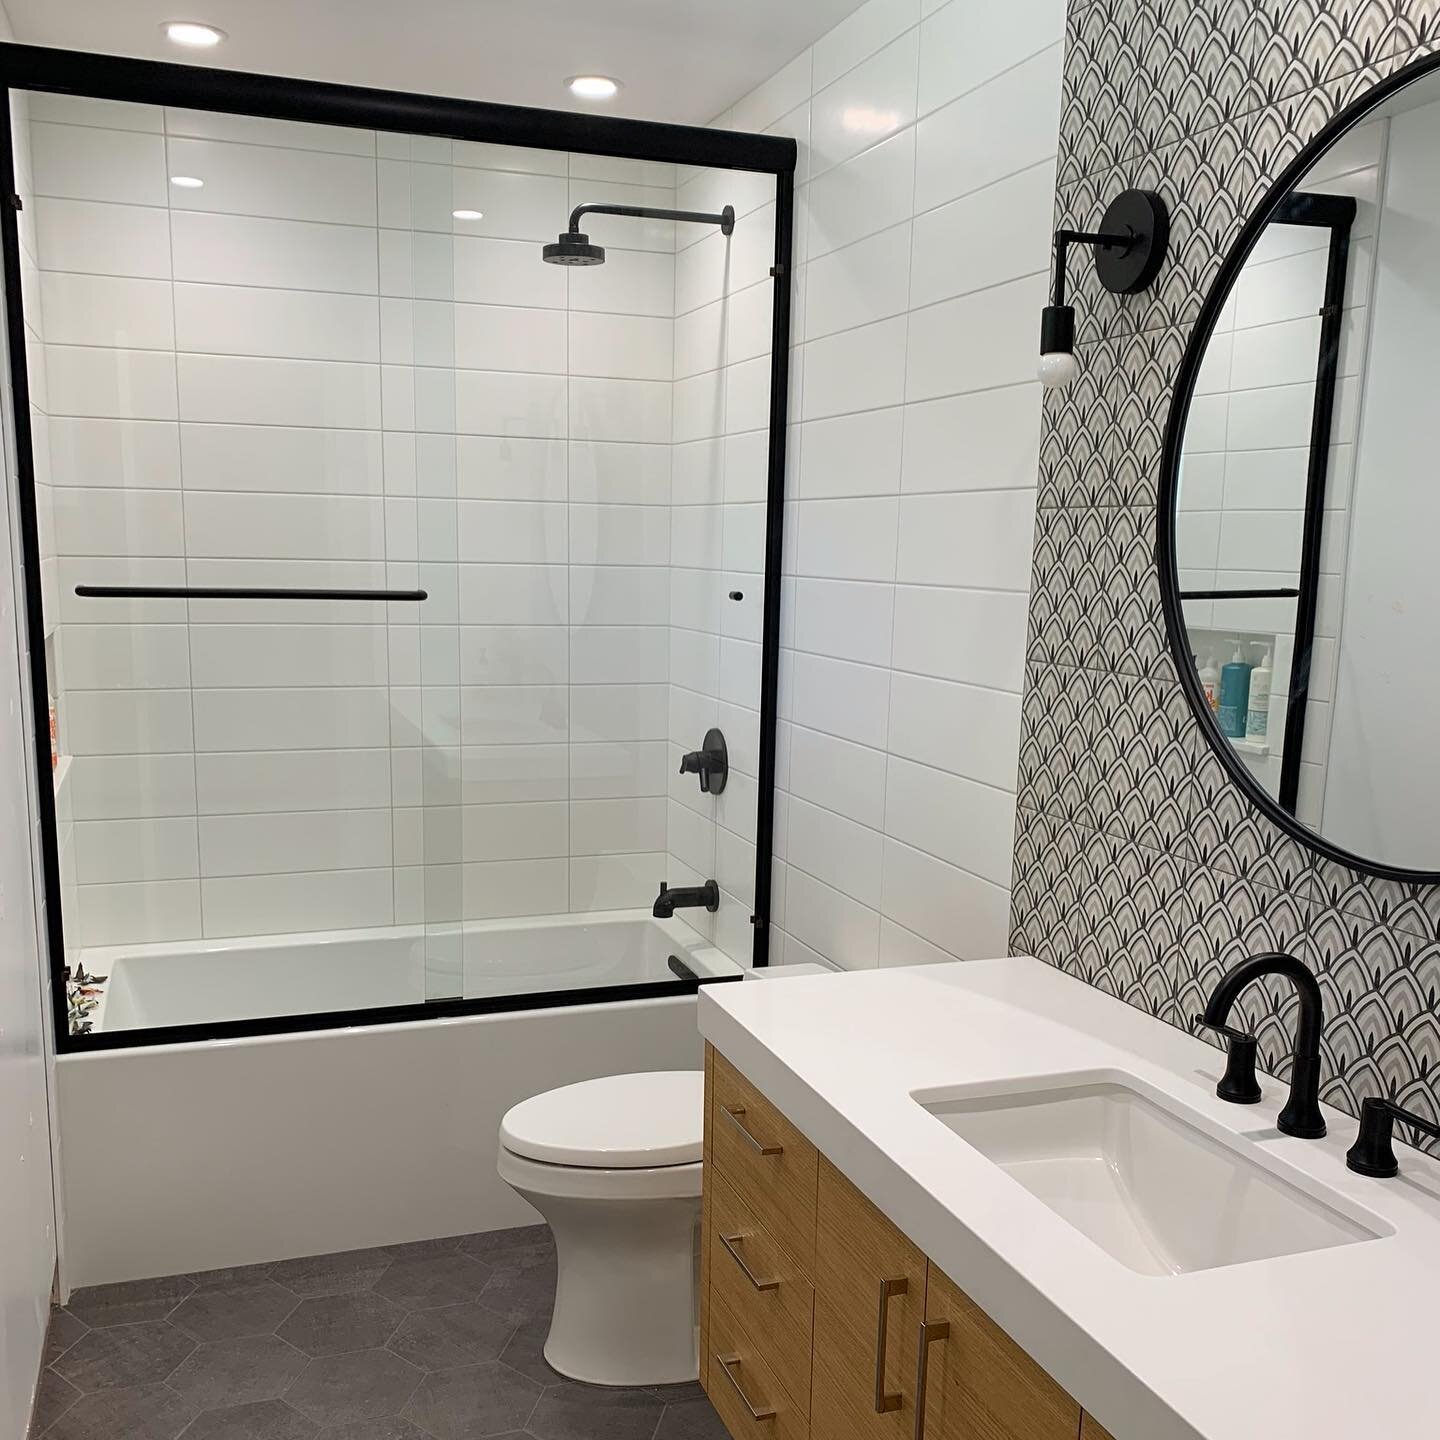 Simple and clean update to this guest bathroom.

#bathroomremodel #bathroomdecor #bathroomdesign #tile #tilework #modern #timeless #northcountysd #upthestandard
#gnsca